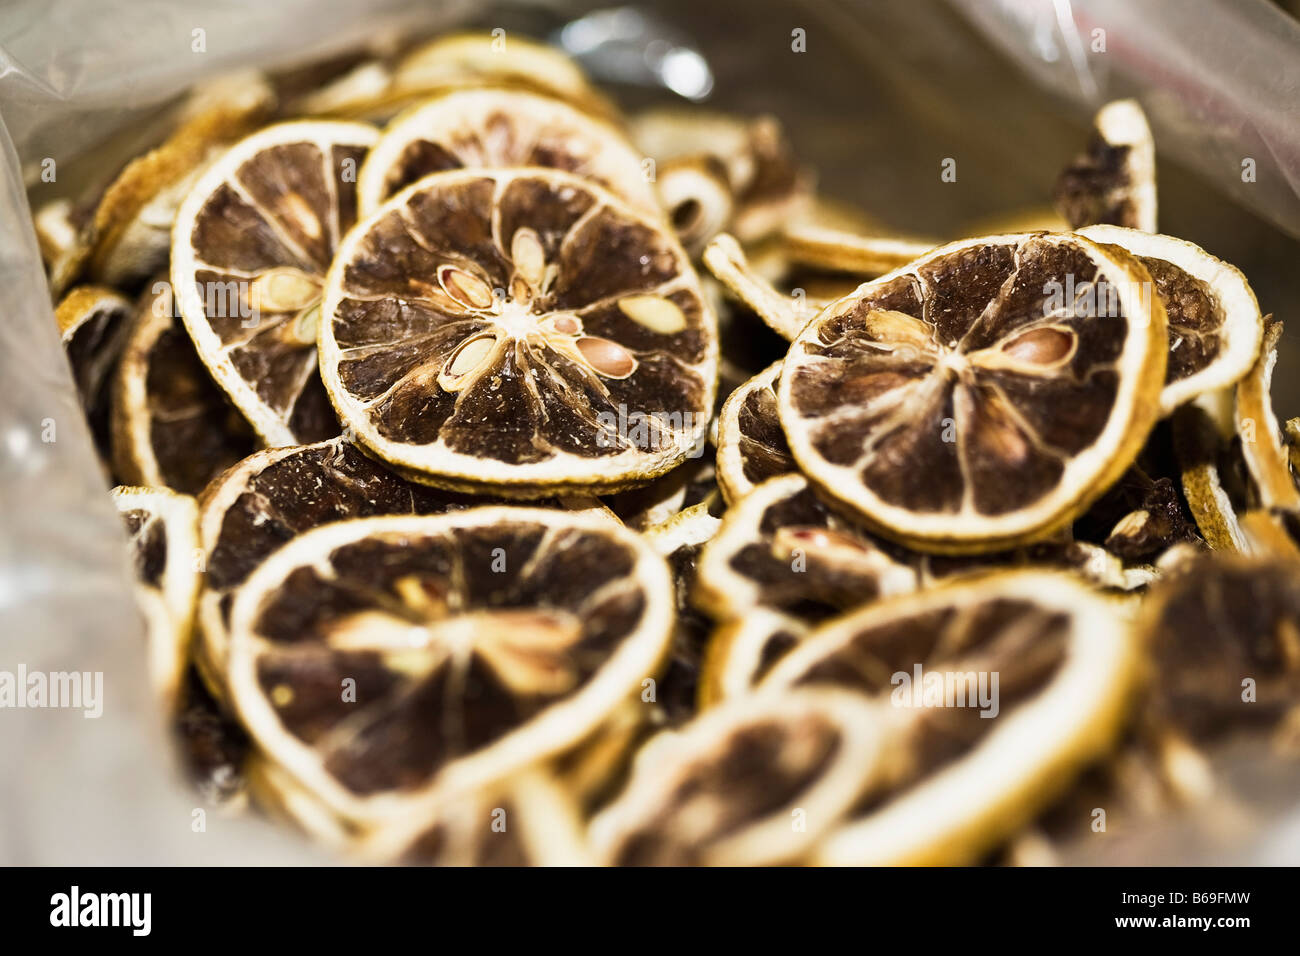 Dried Lemon Slices - Chinese Dehydrated Lime Slice Tea